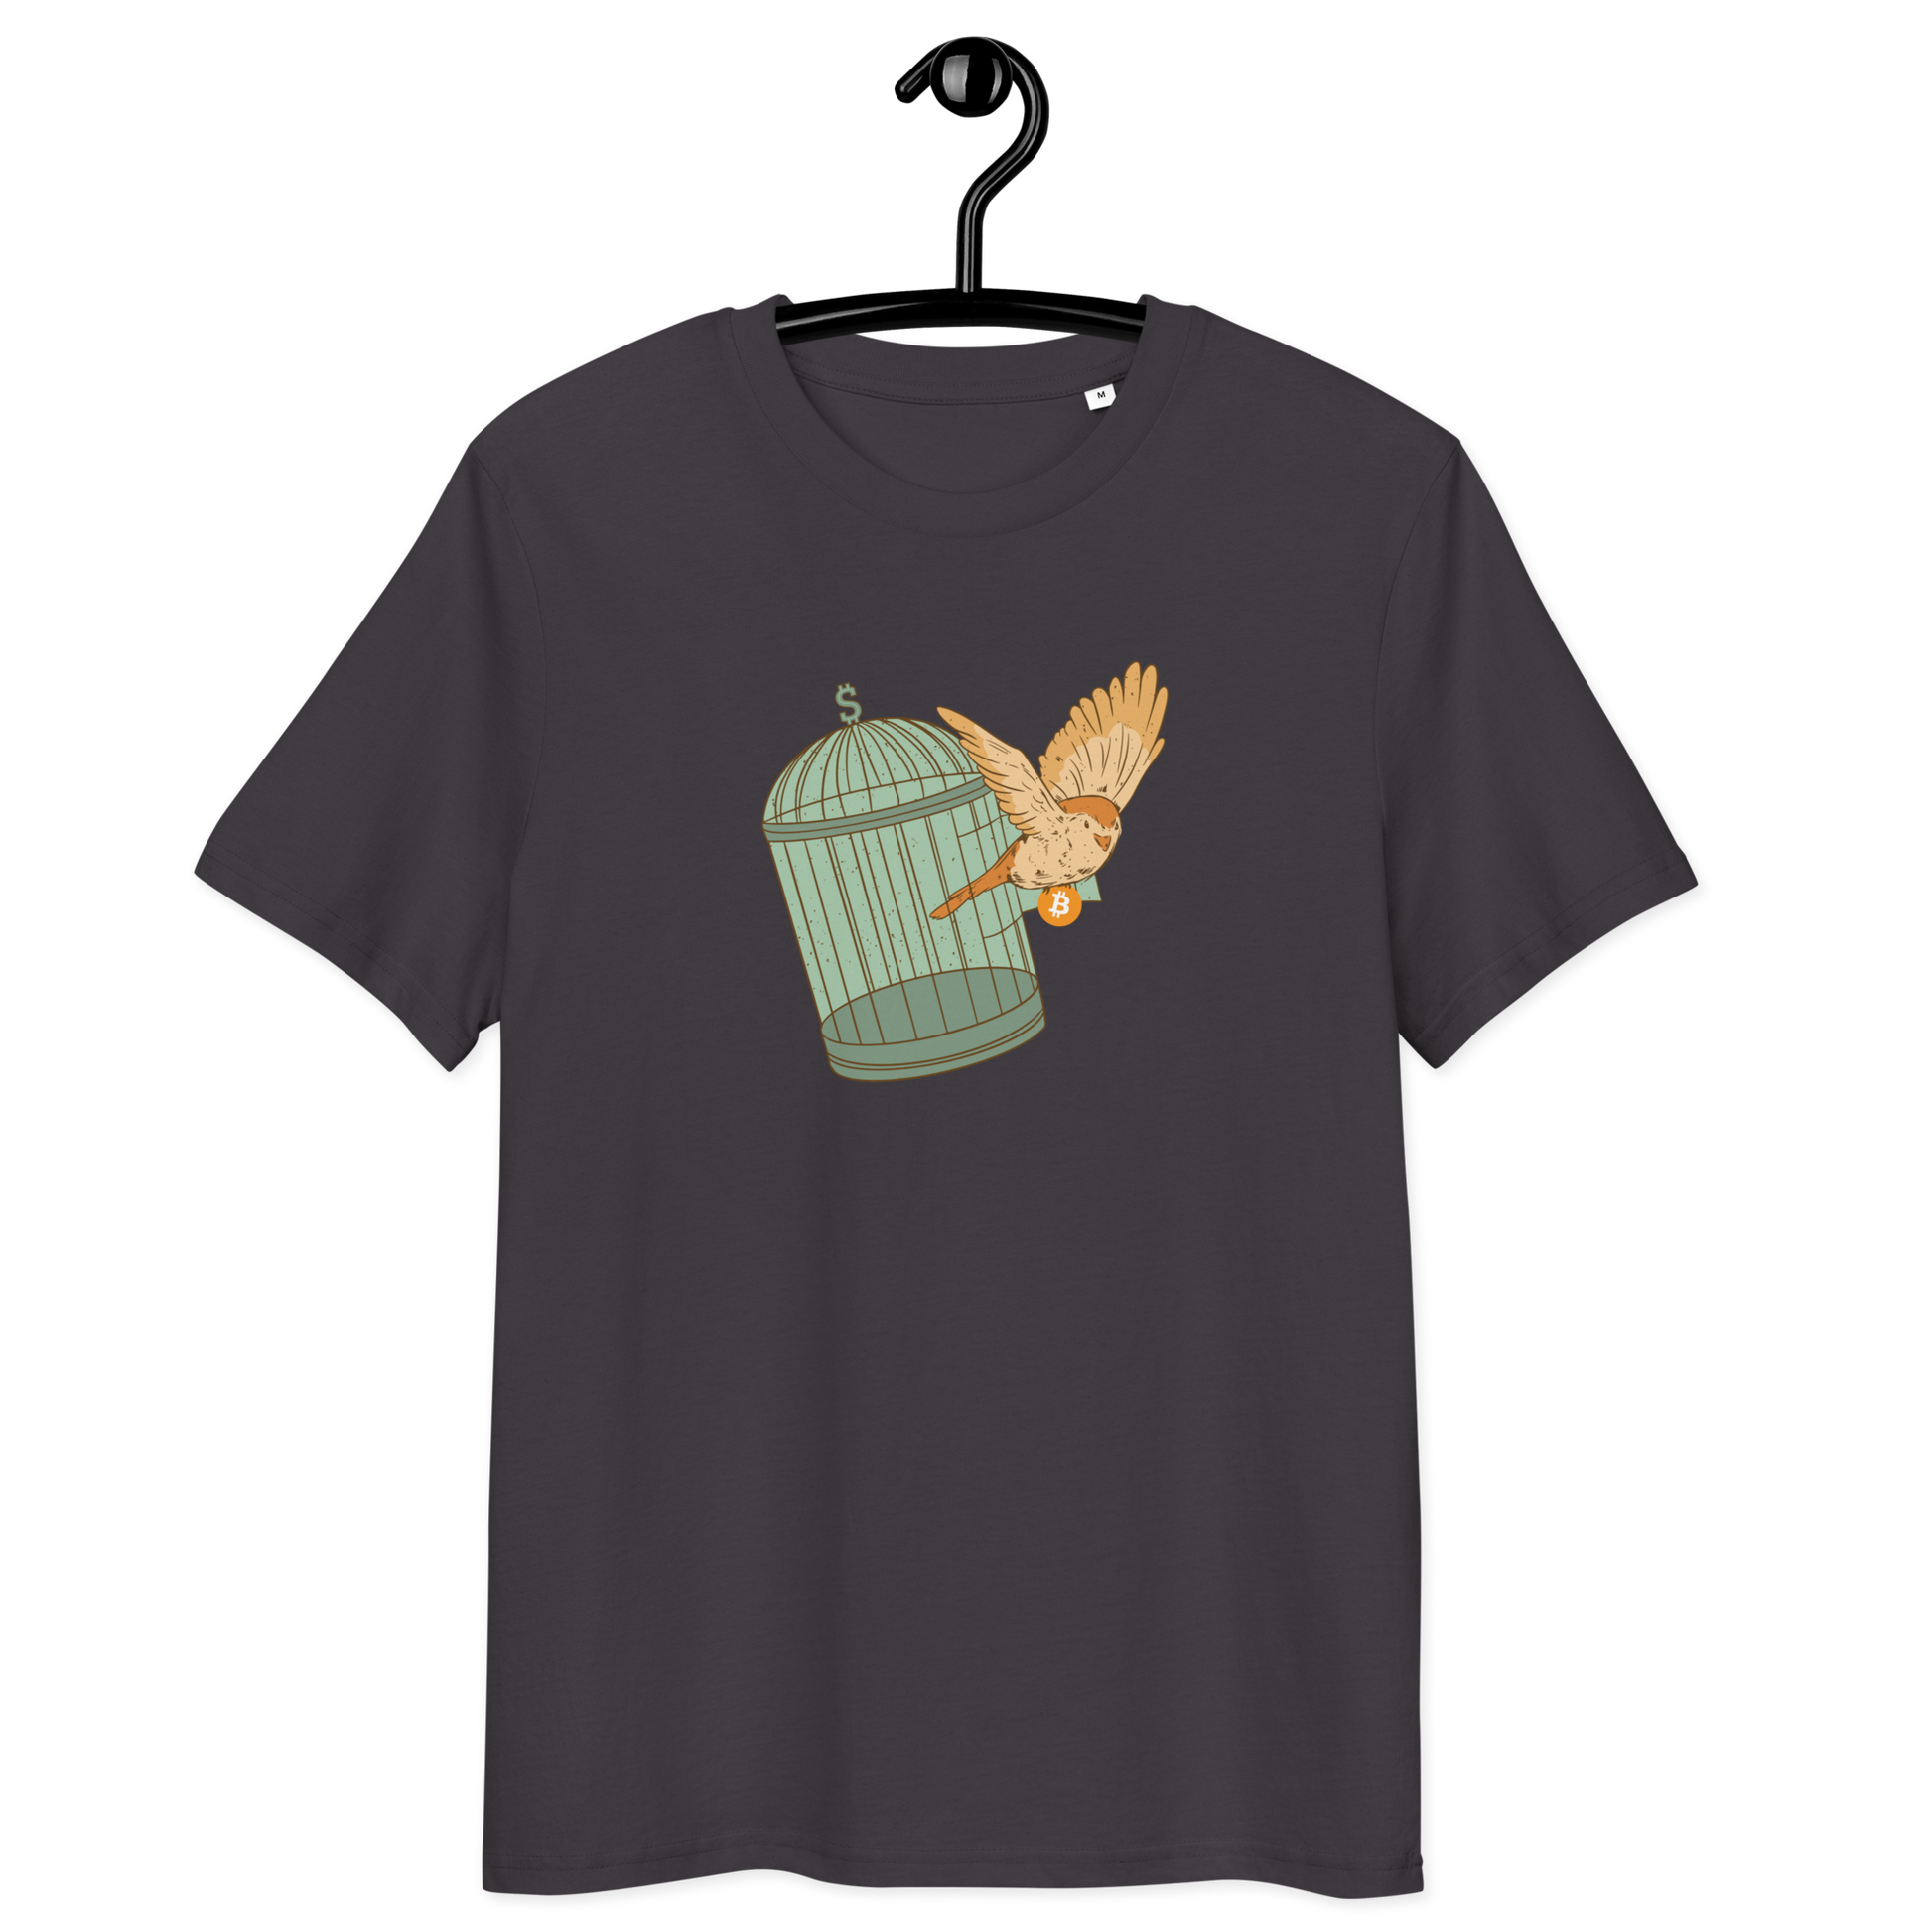 Front view of an athracite bitcoin t-shirt.